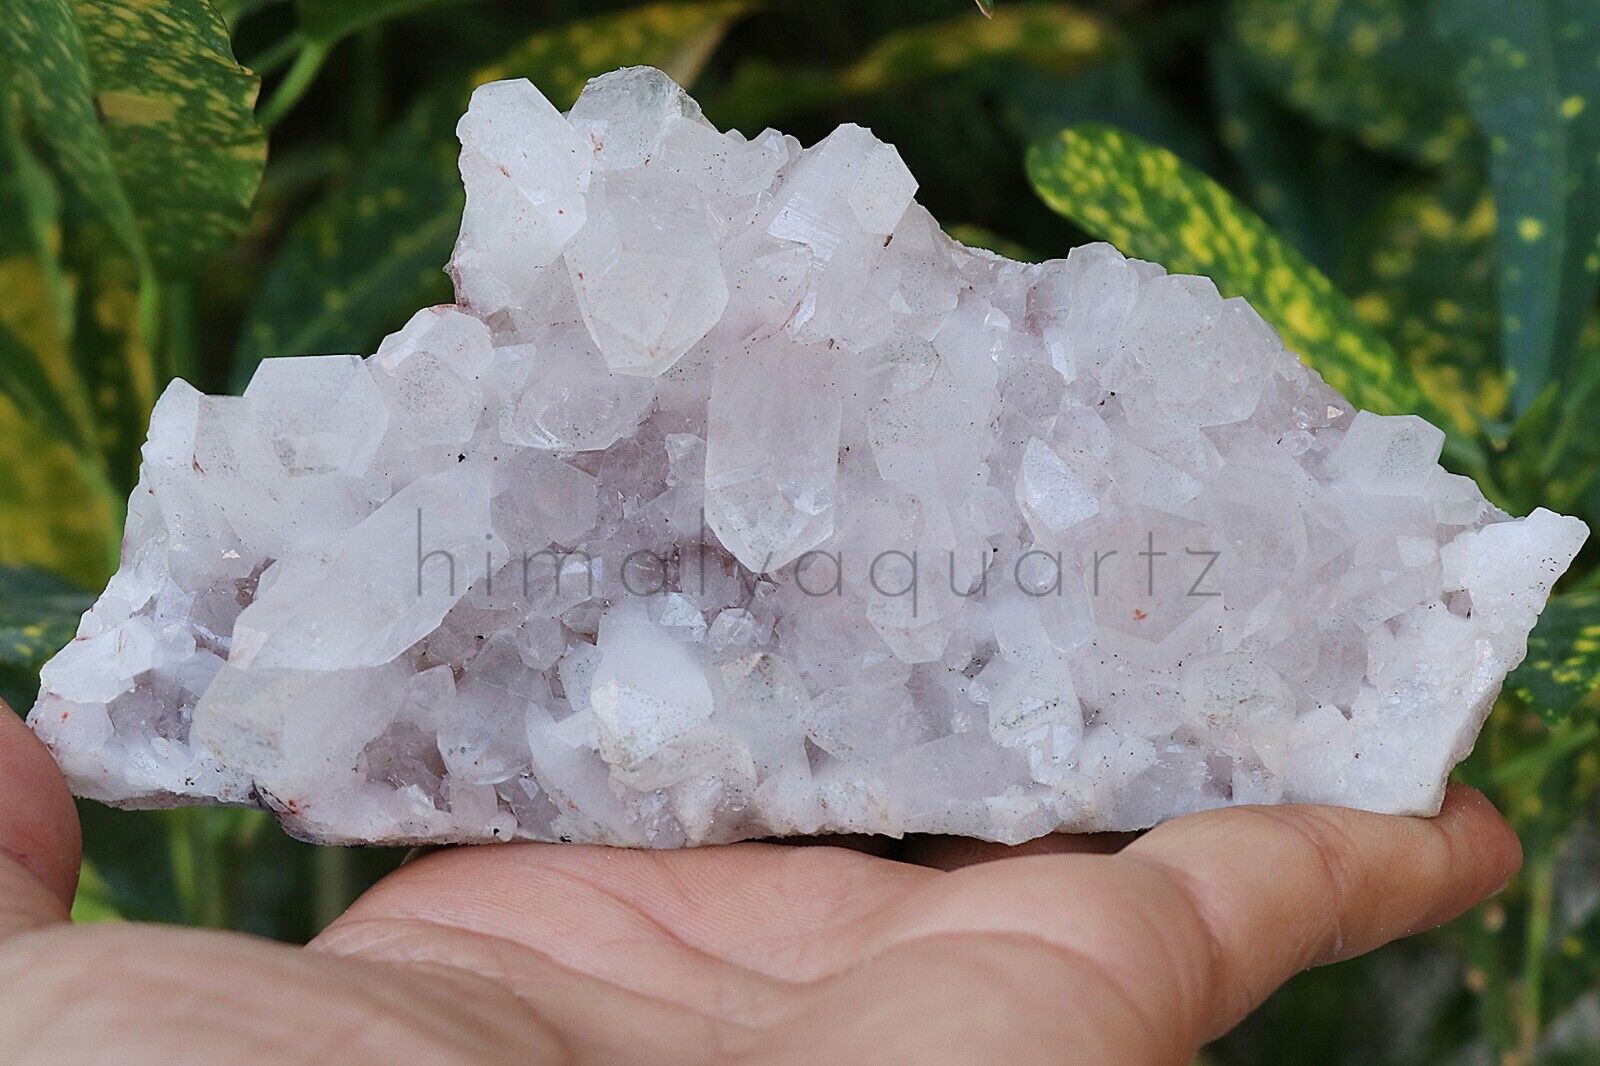 292 gm Natural AAA+ Beautiful White QUARTZ Crystal Cluster Mineral Specimen